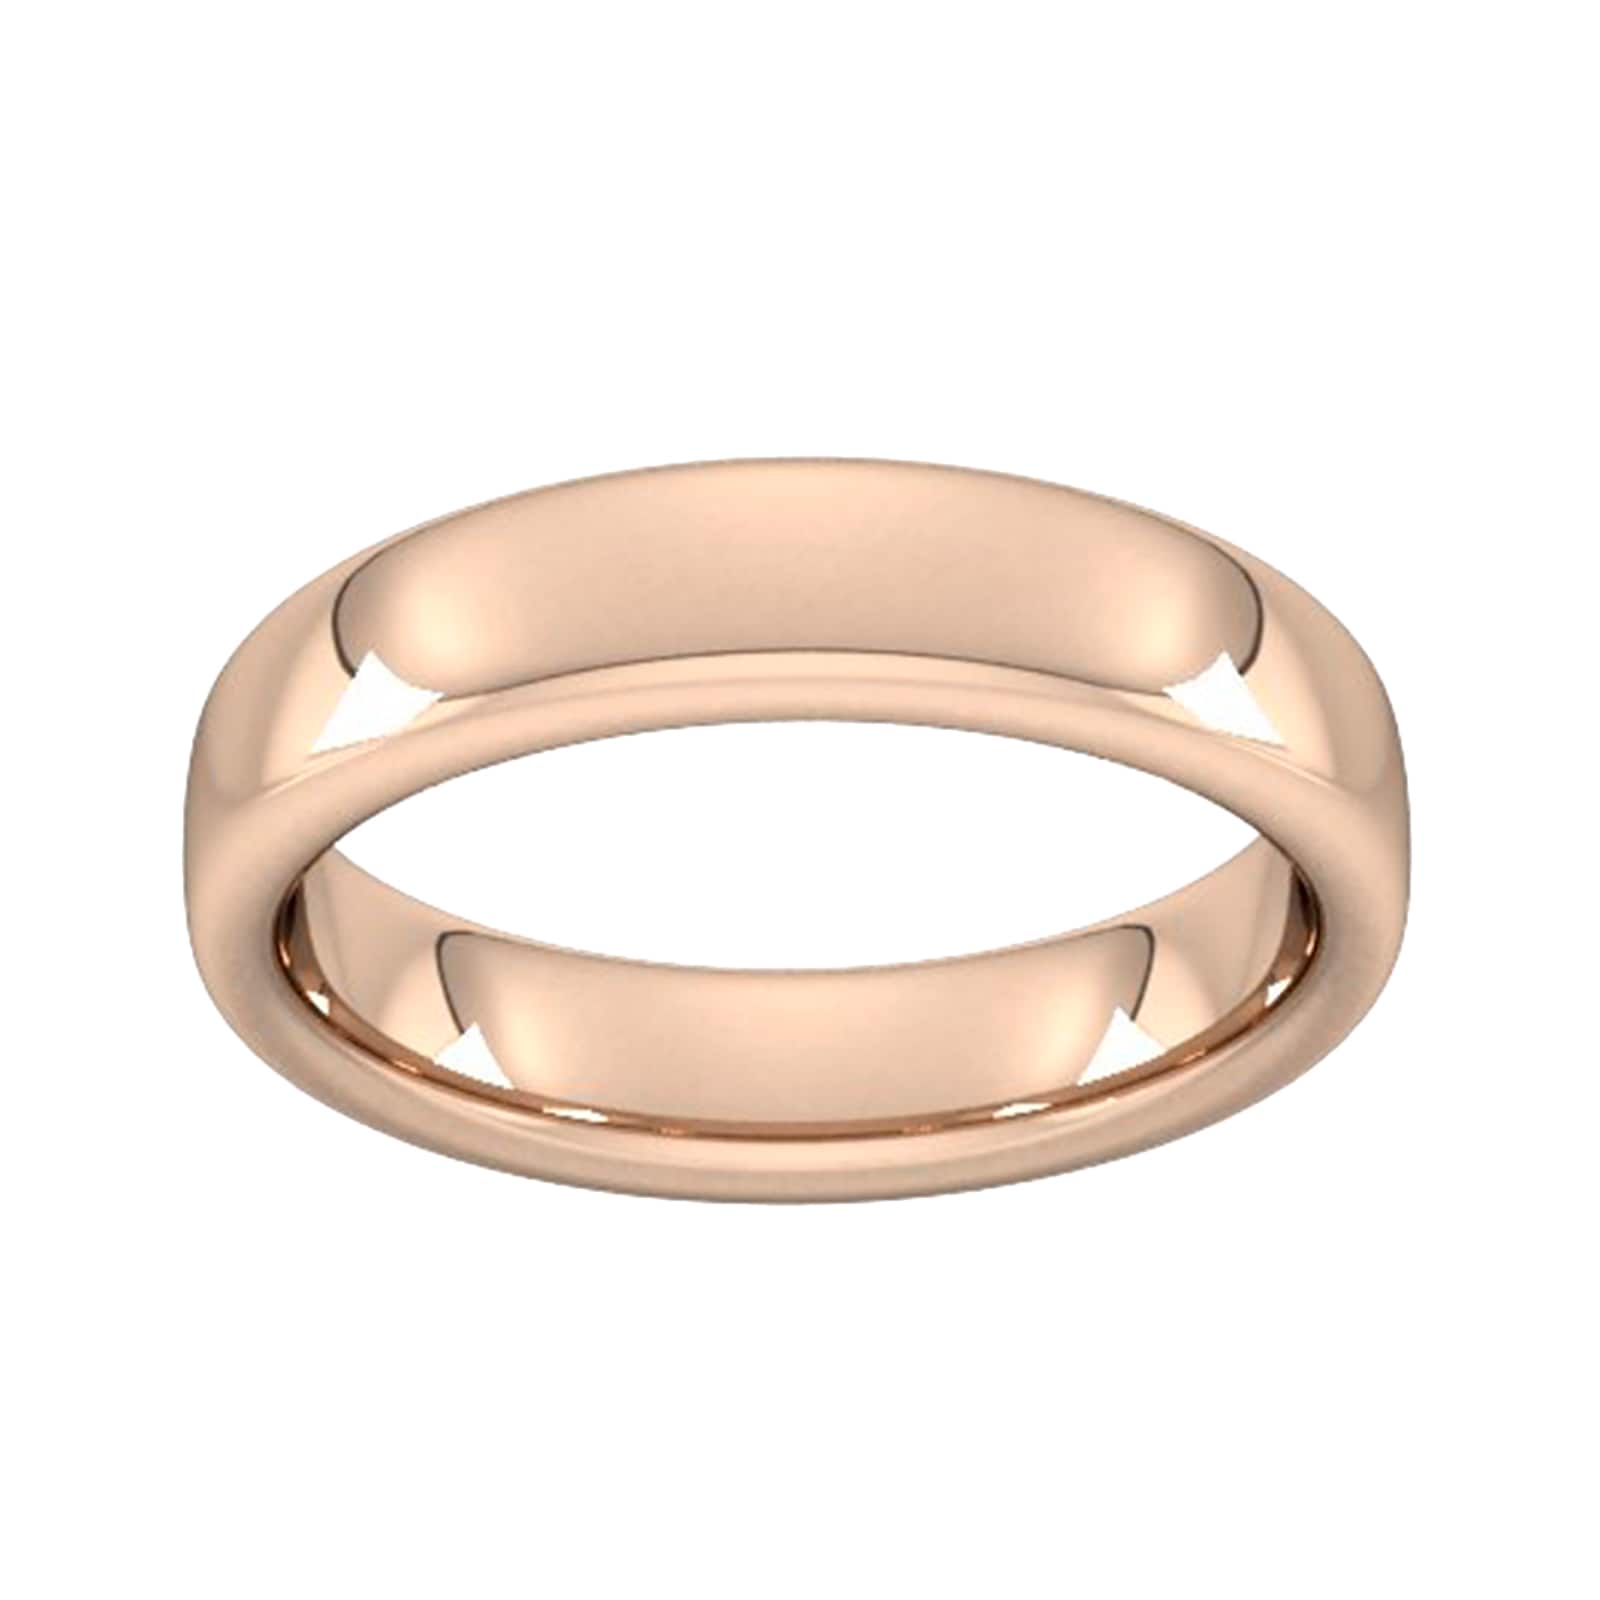 5mm Slight Court Extra Heavy Wedding Ring In 9 Carat Rose Gold - Ring Size O